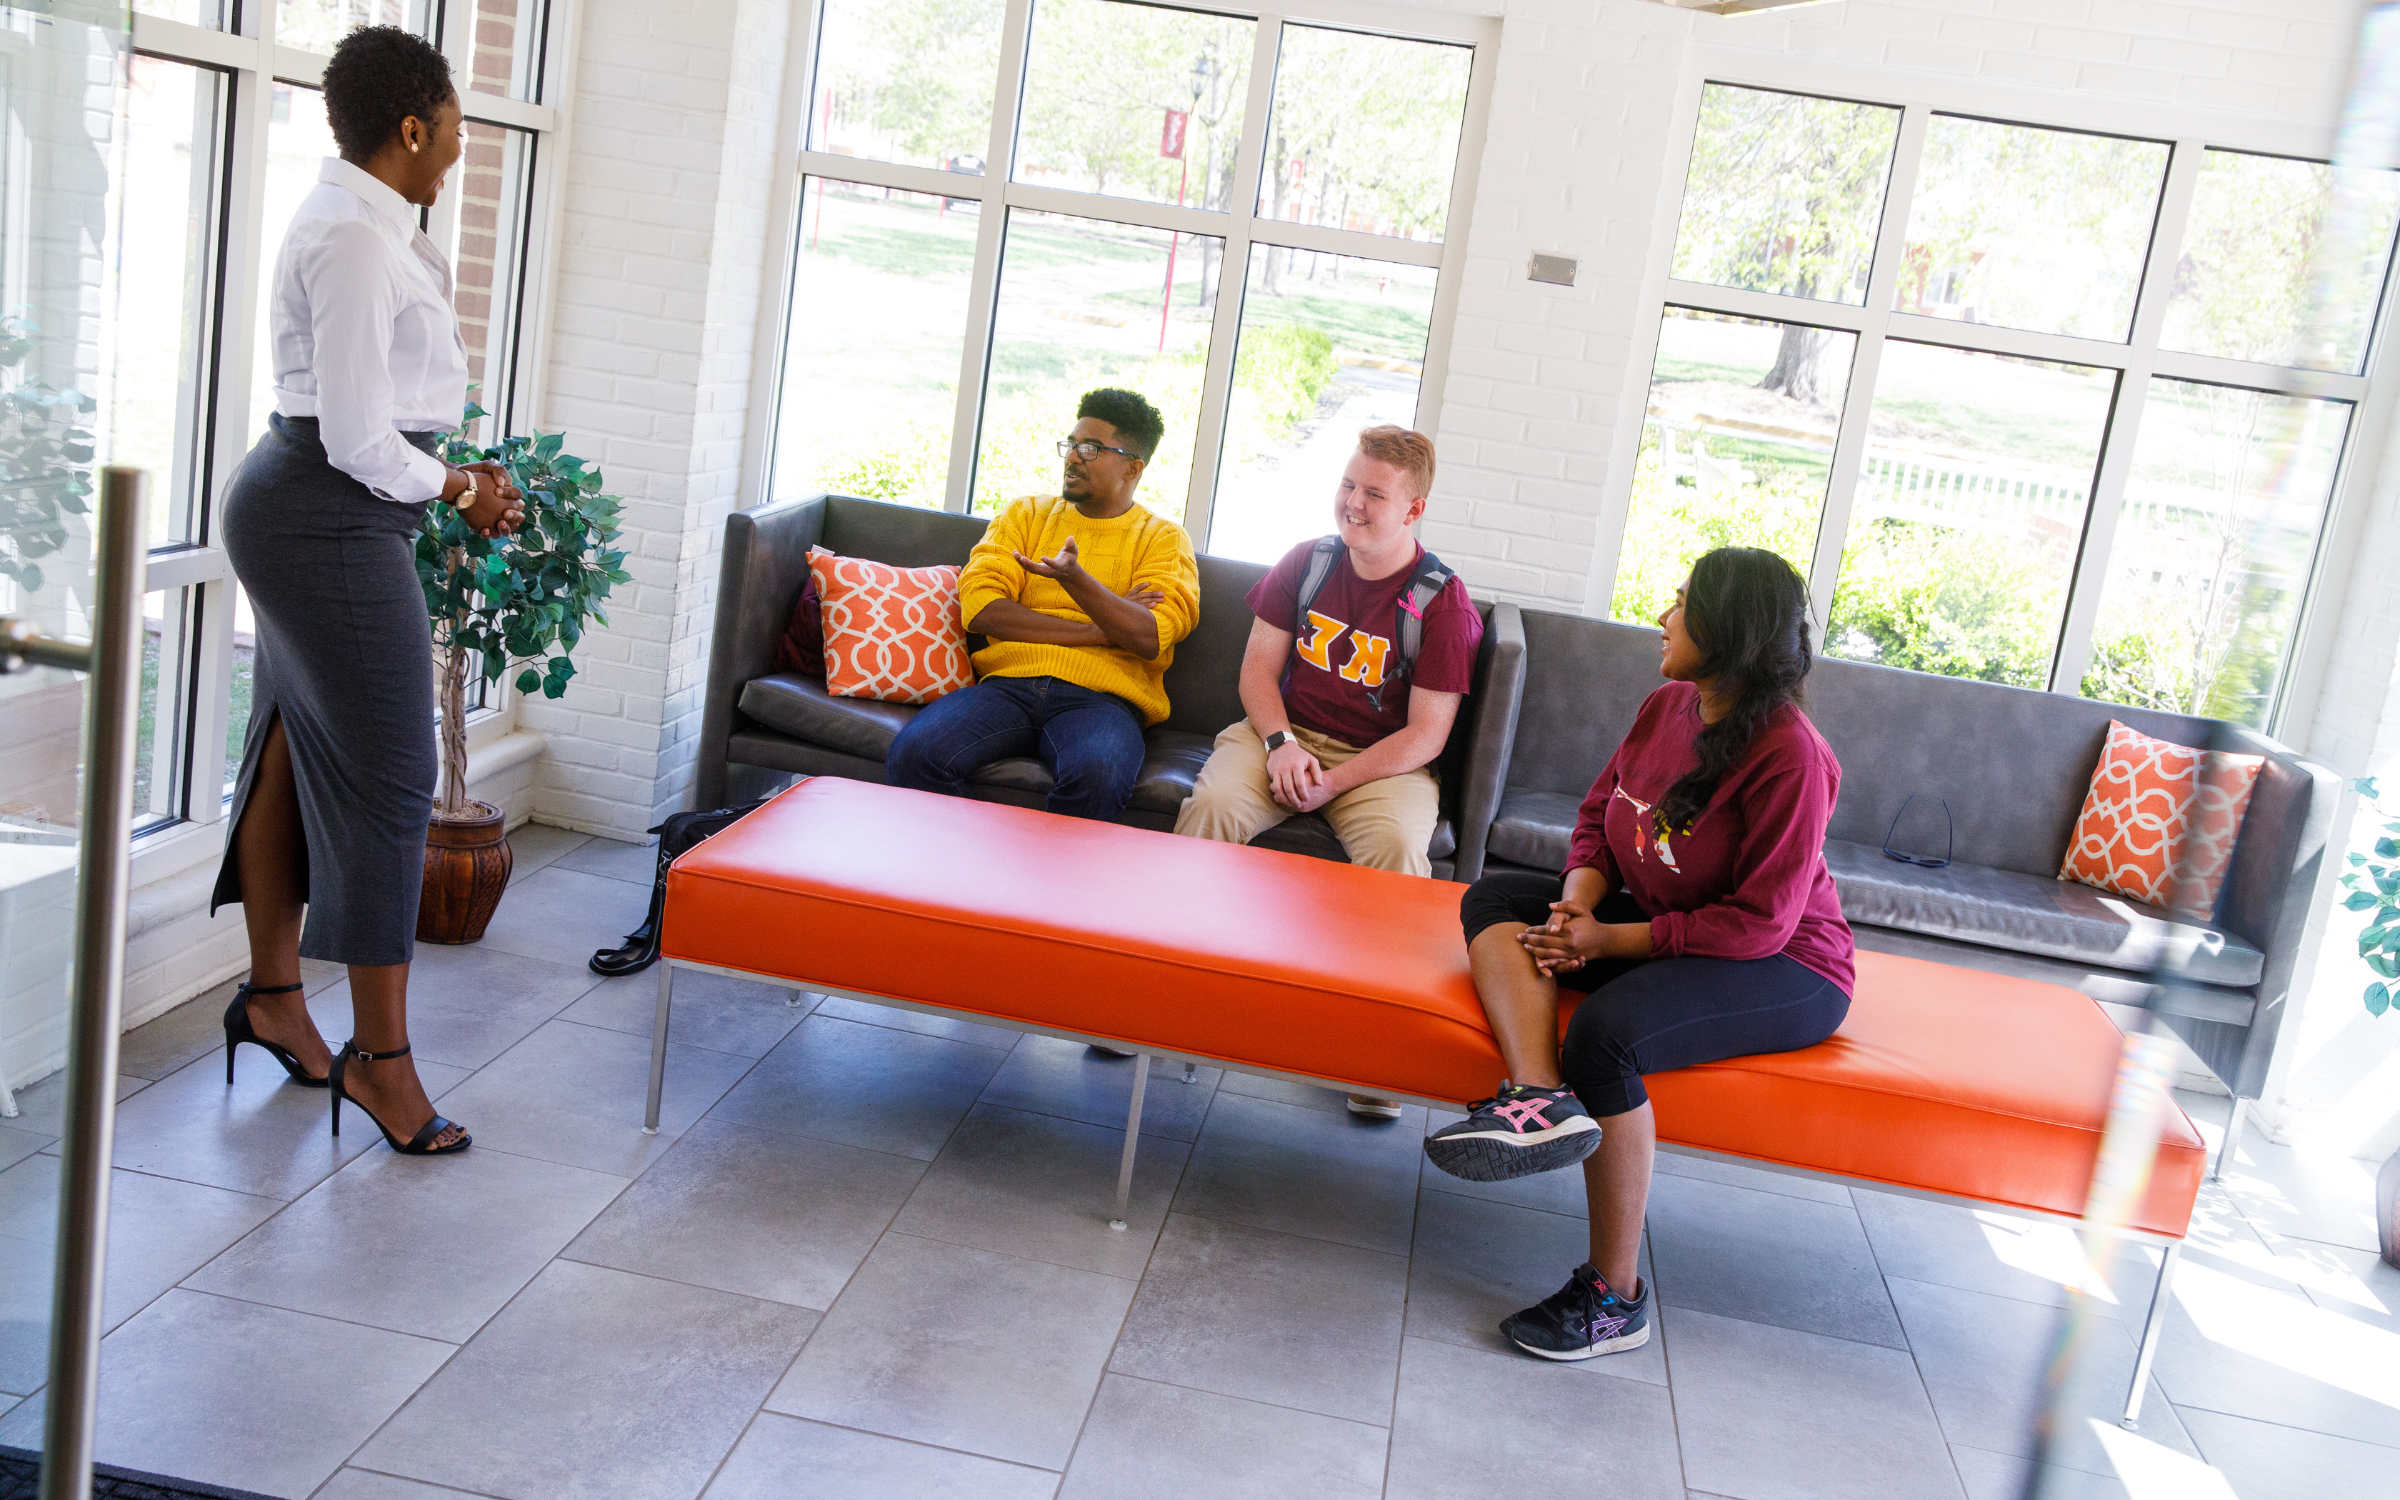 Washington College students sitting on a couch in the Center for Career Development